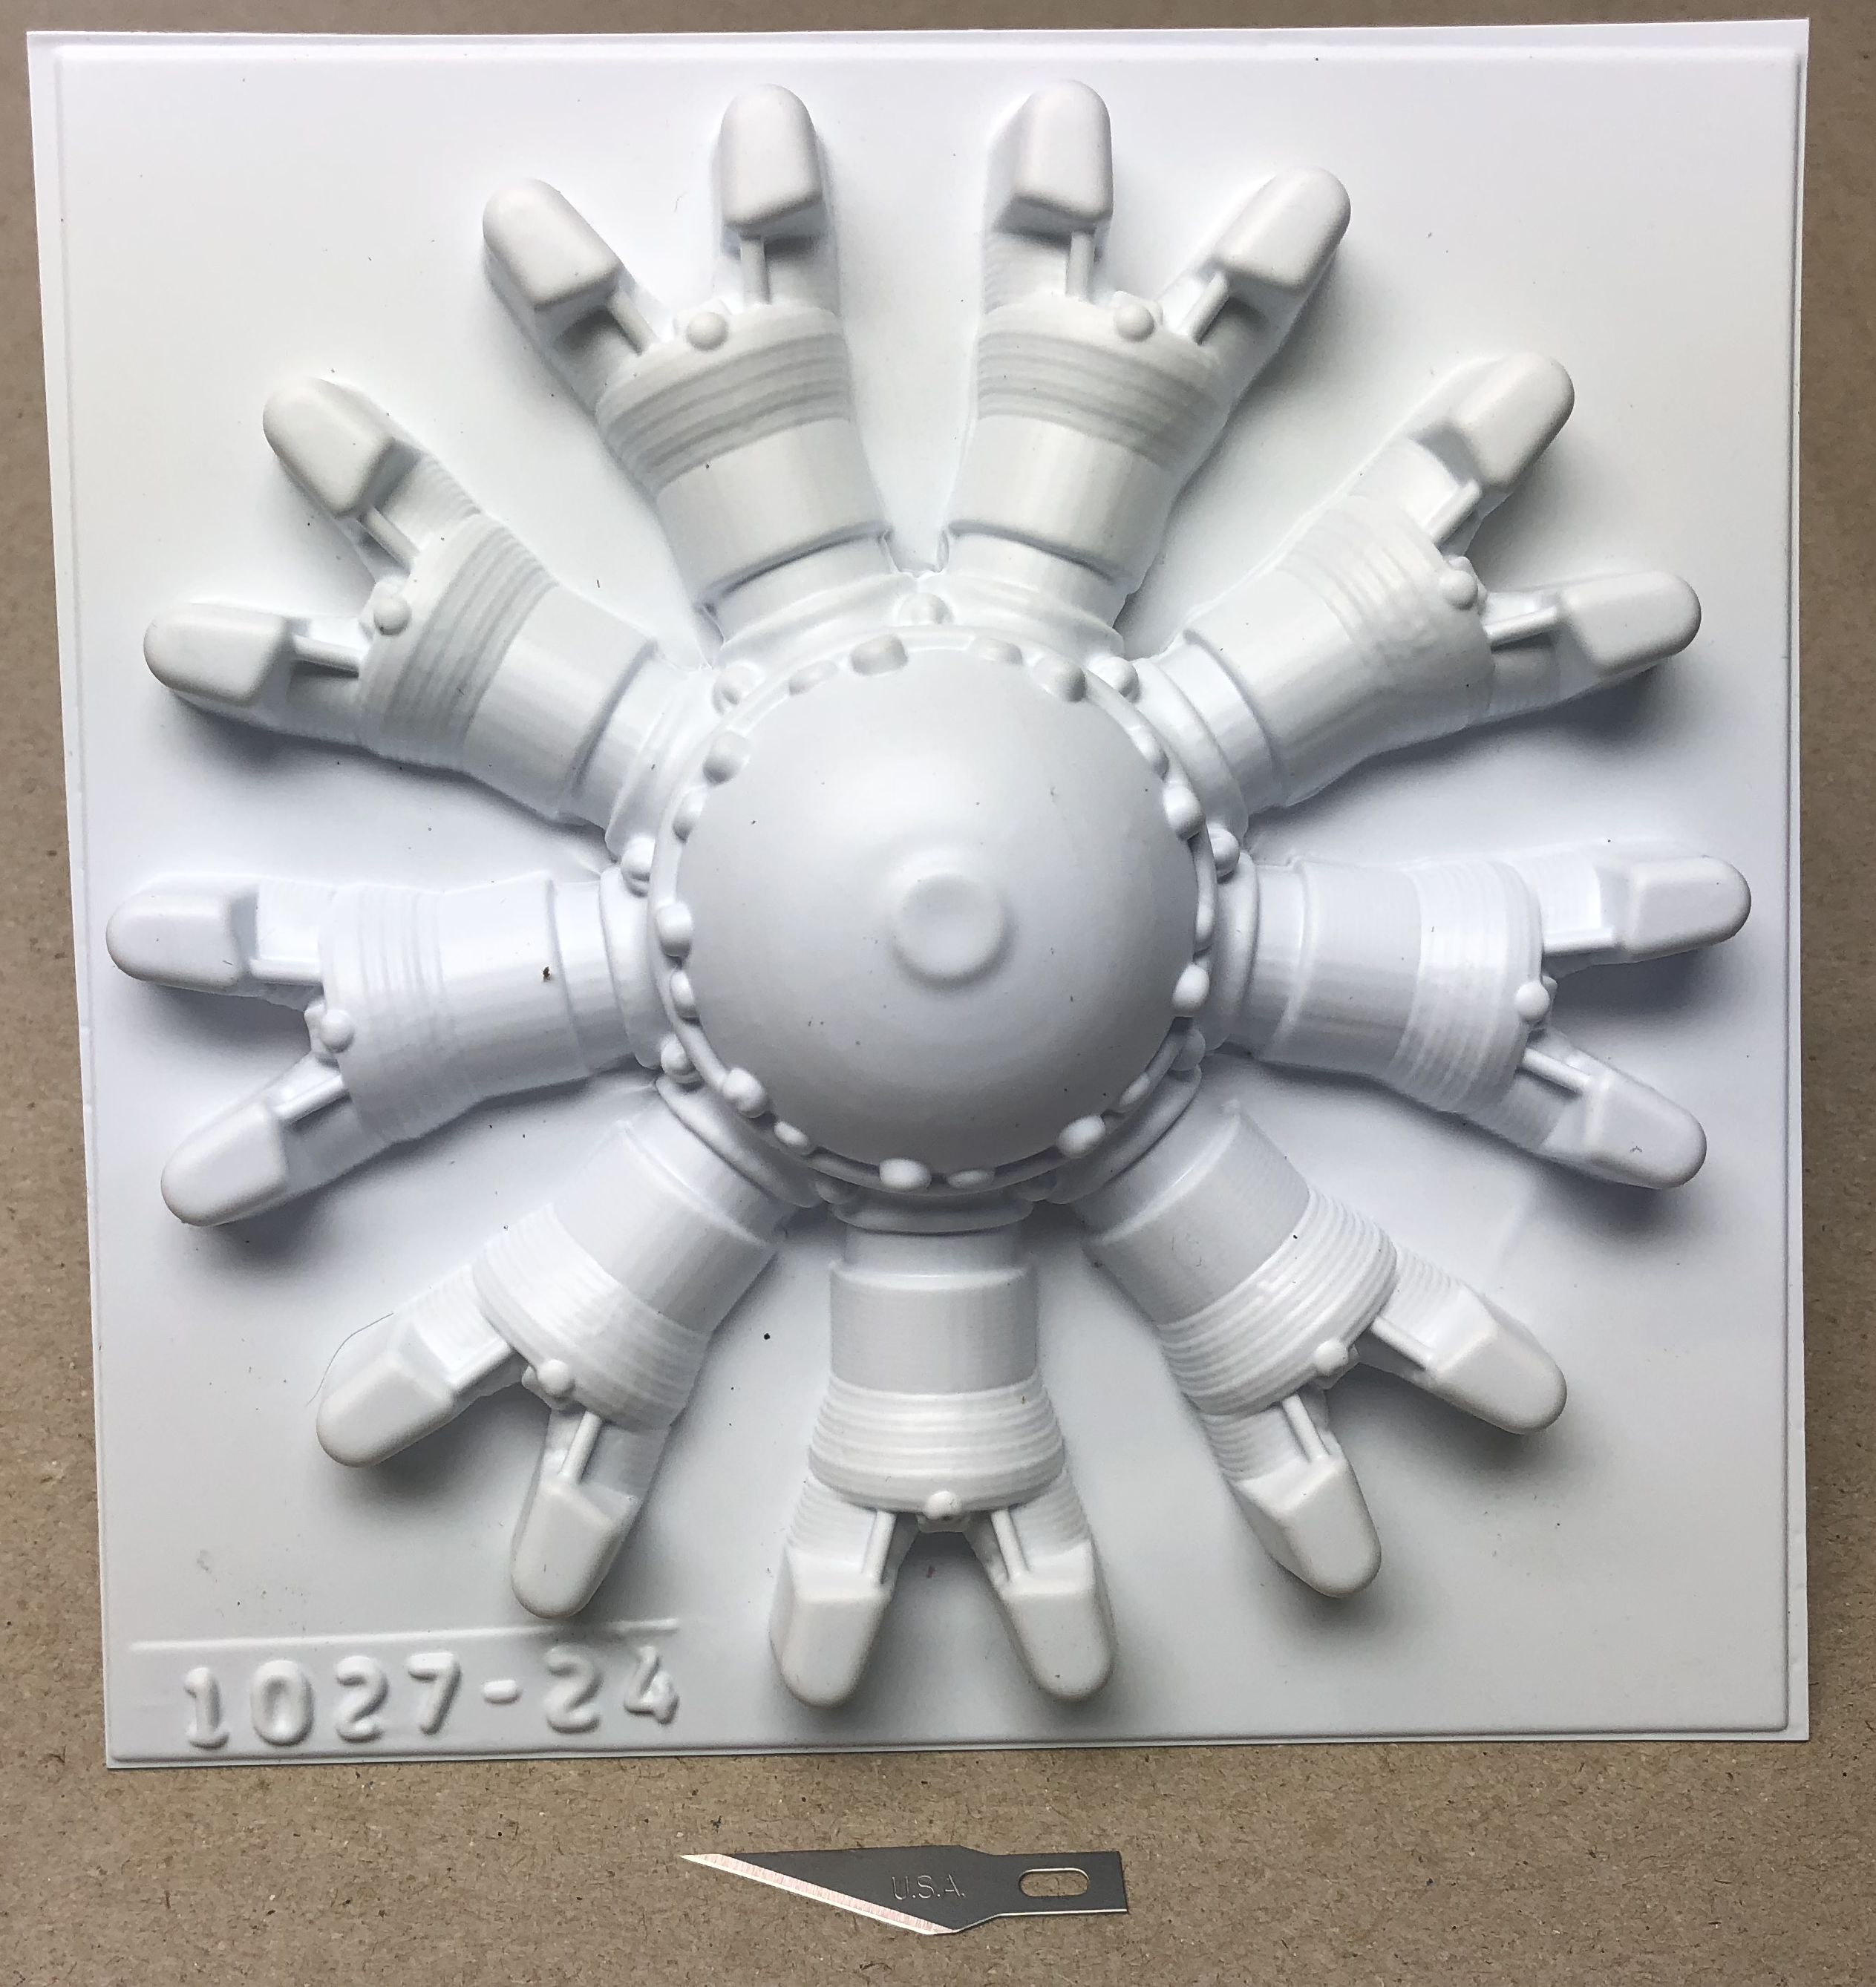 2in radial front 9 cyl P/N 1027-2